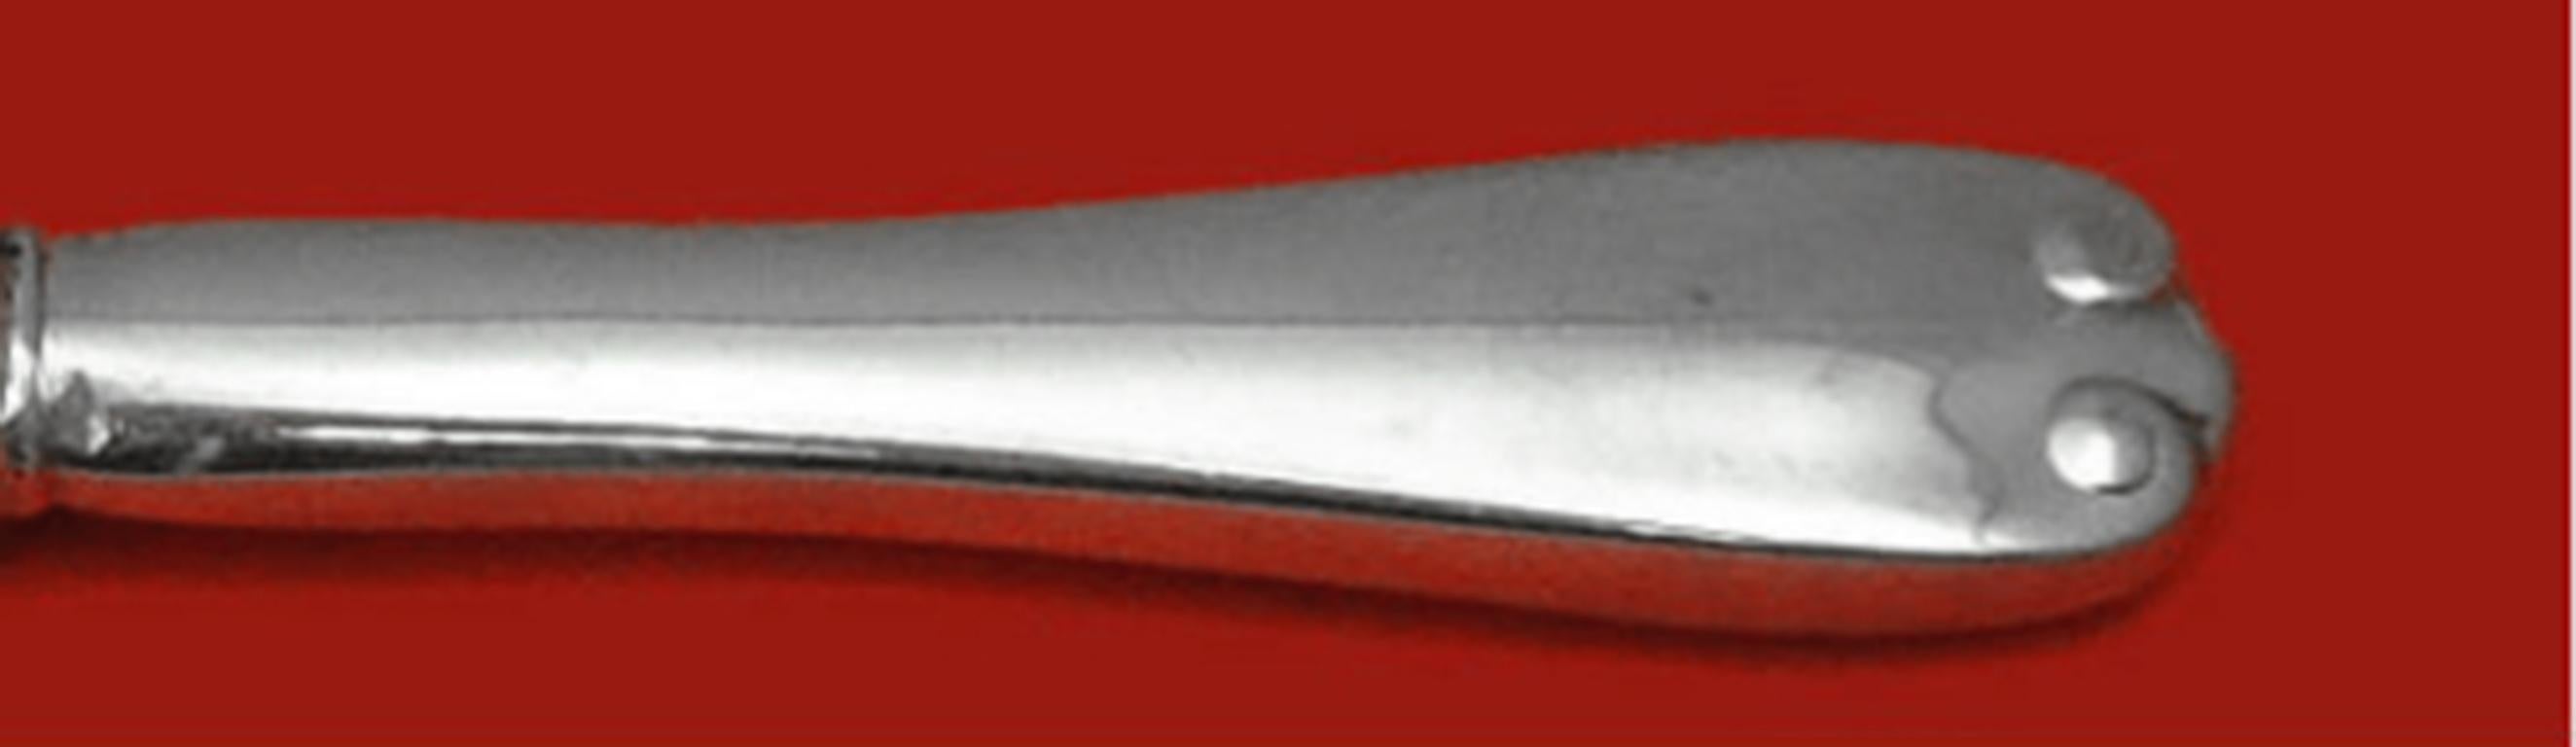 Sterling silver hollow handle with stainless blade master butter, 7 1/8